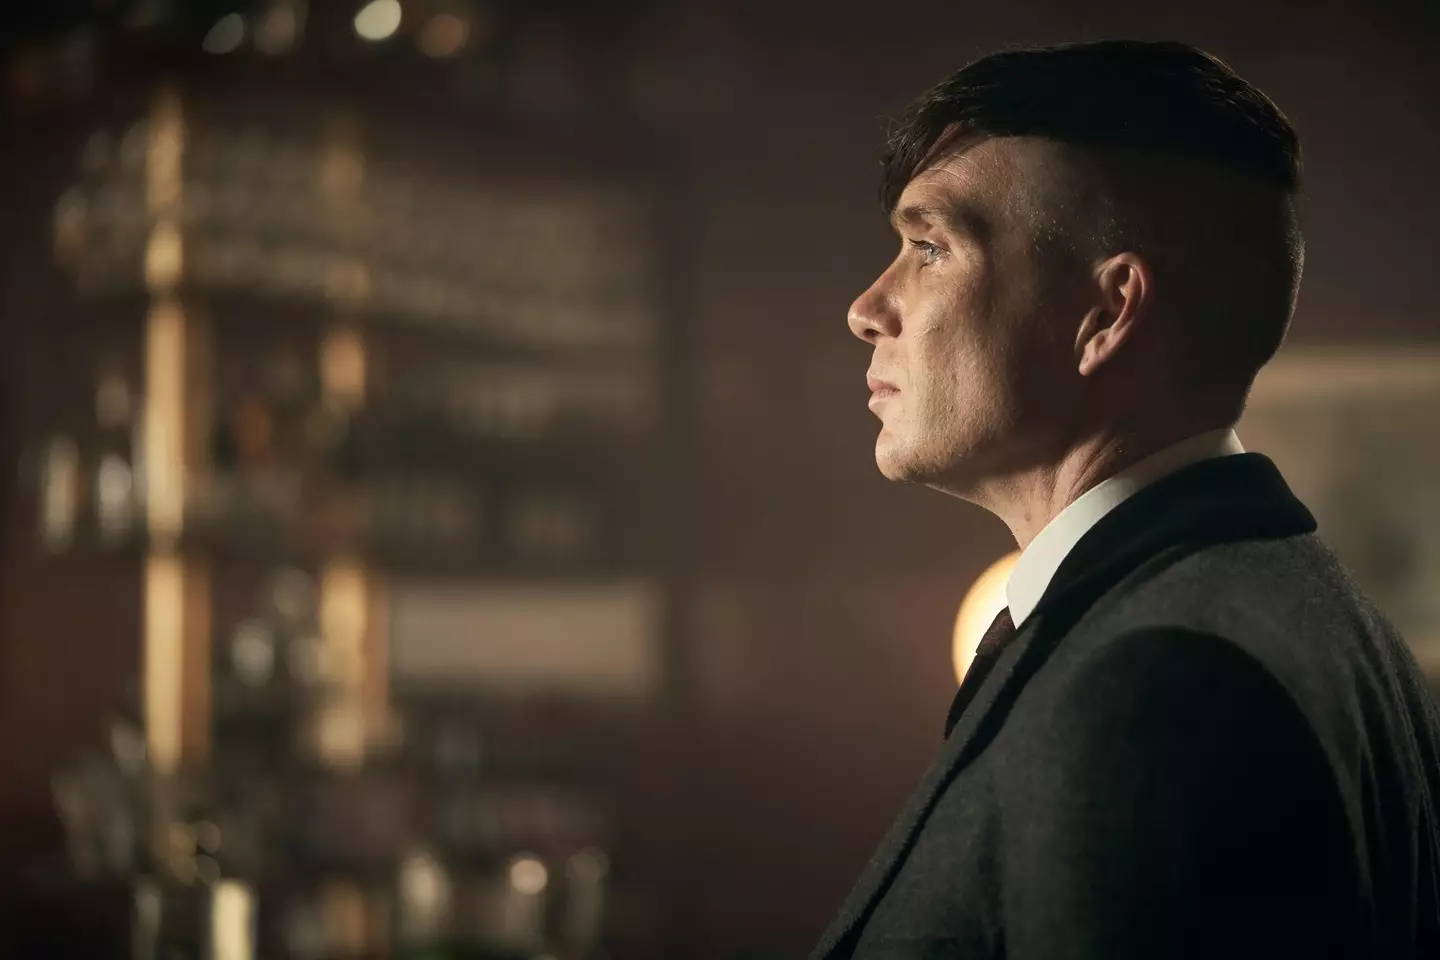 Cillian Murphy has confirmed he would return for a Peaky Blinders film when the time came.